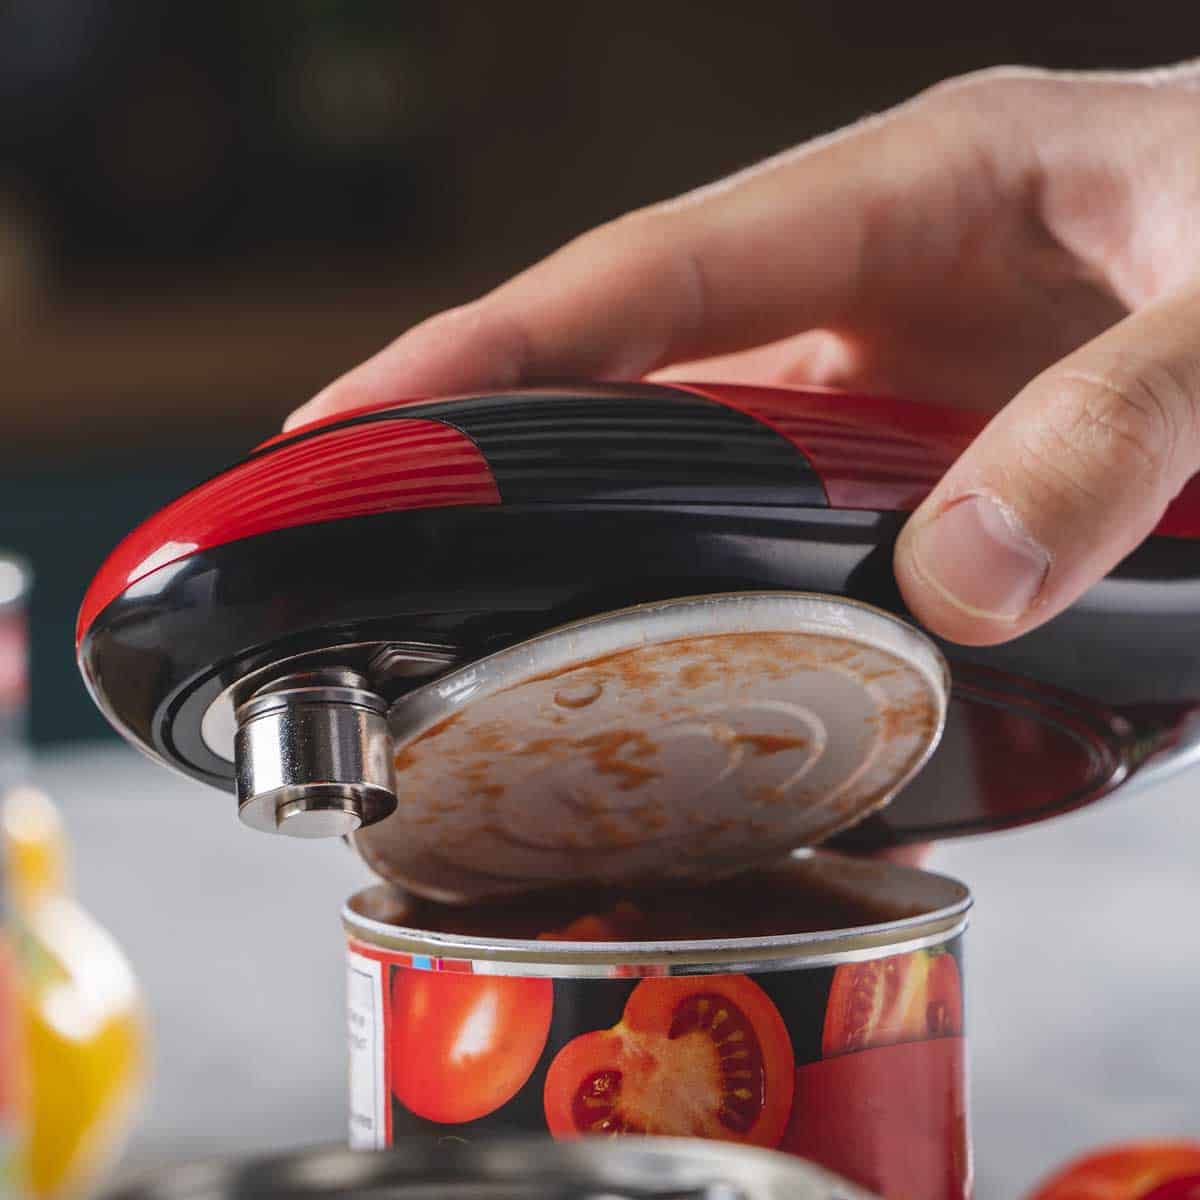 https://www.cooksprofessional.co.uk/wp-content/uploads/2022/09/Automatic-Can-Opener-Red-LS-4-2000px.jpg